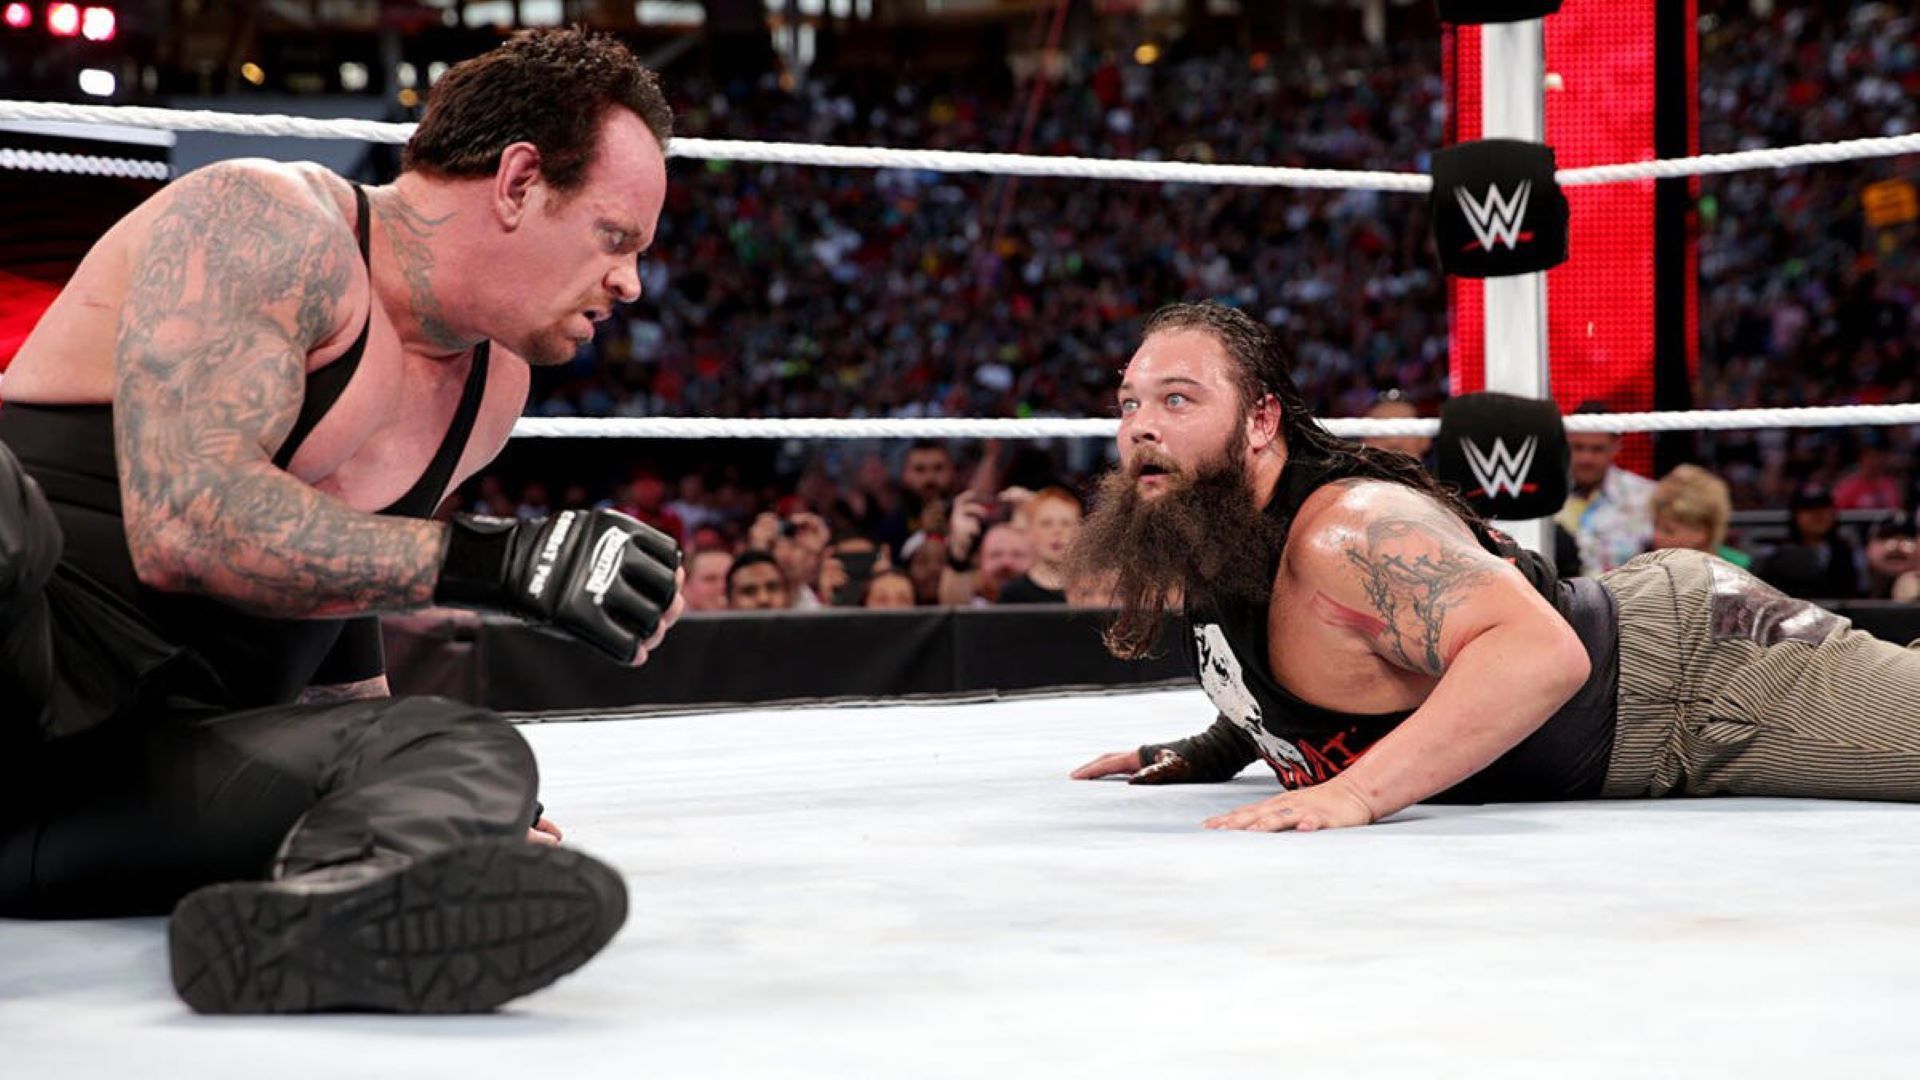 Beating the Undertaker would have cemented Wyatt&#039;s legacy.